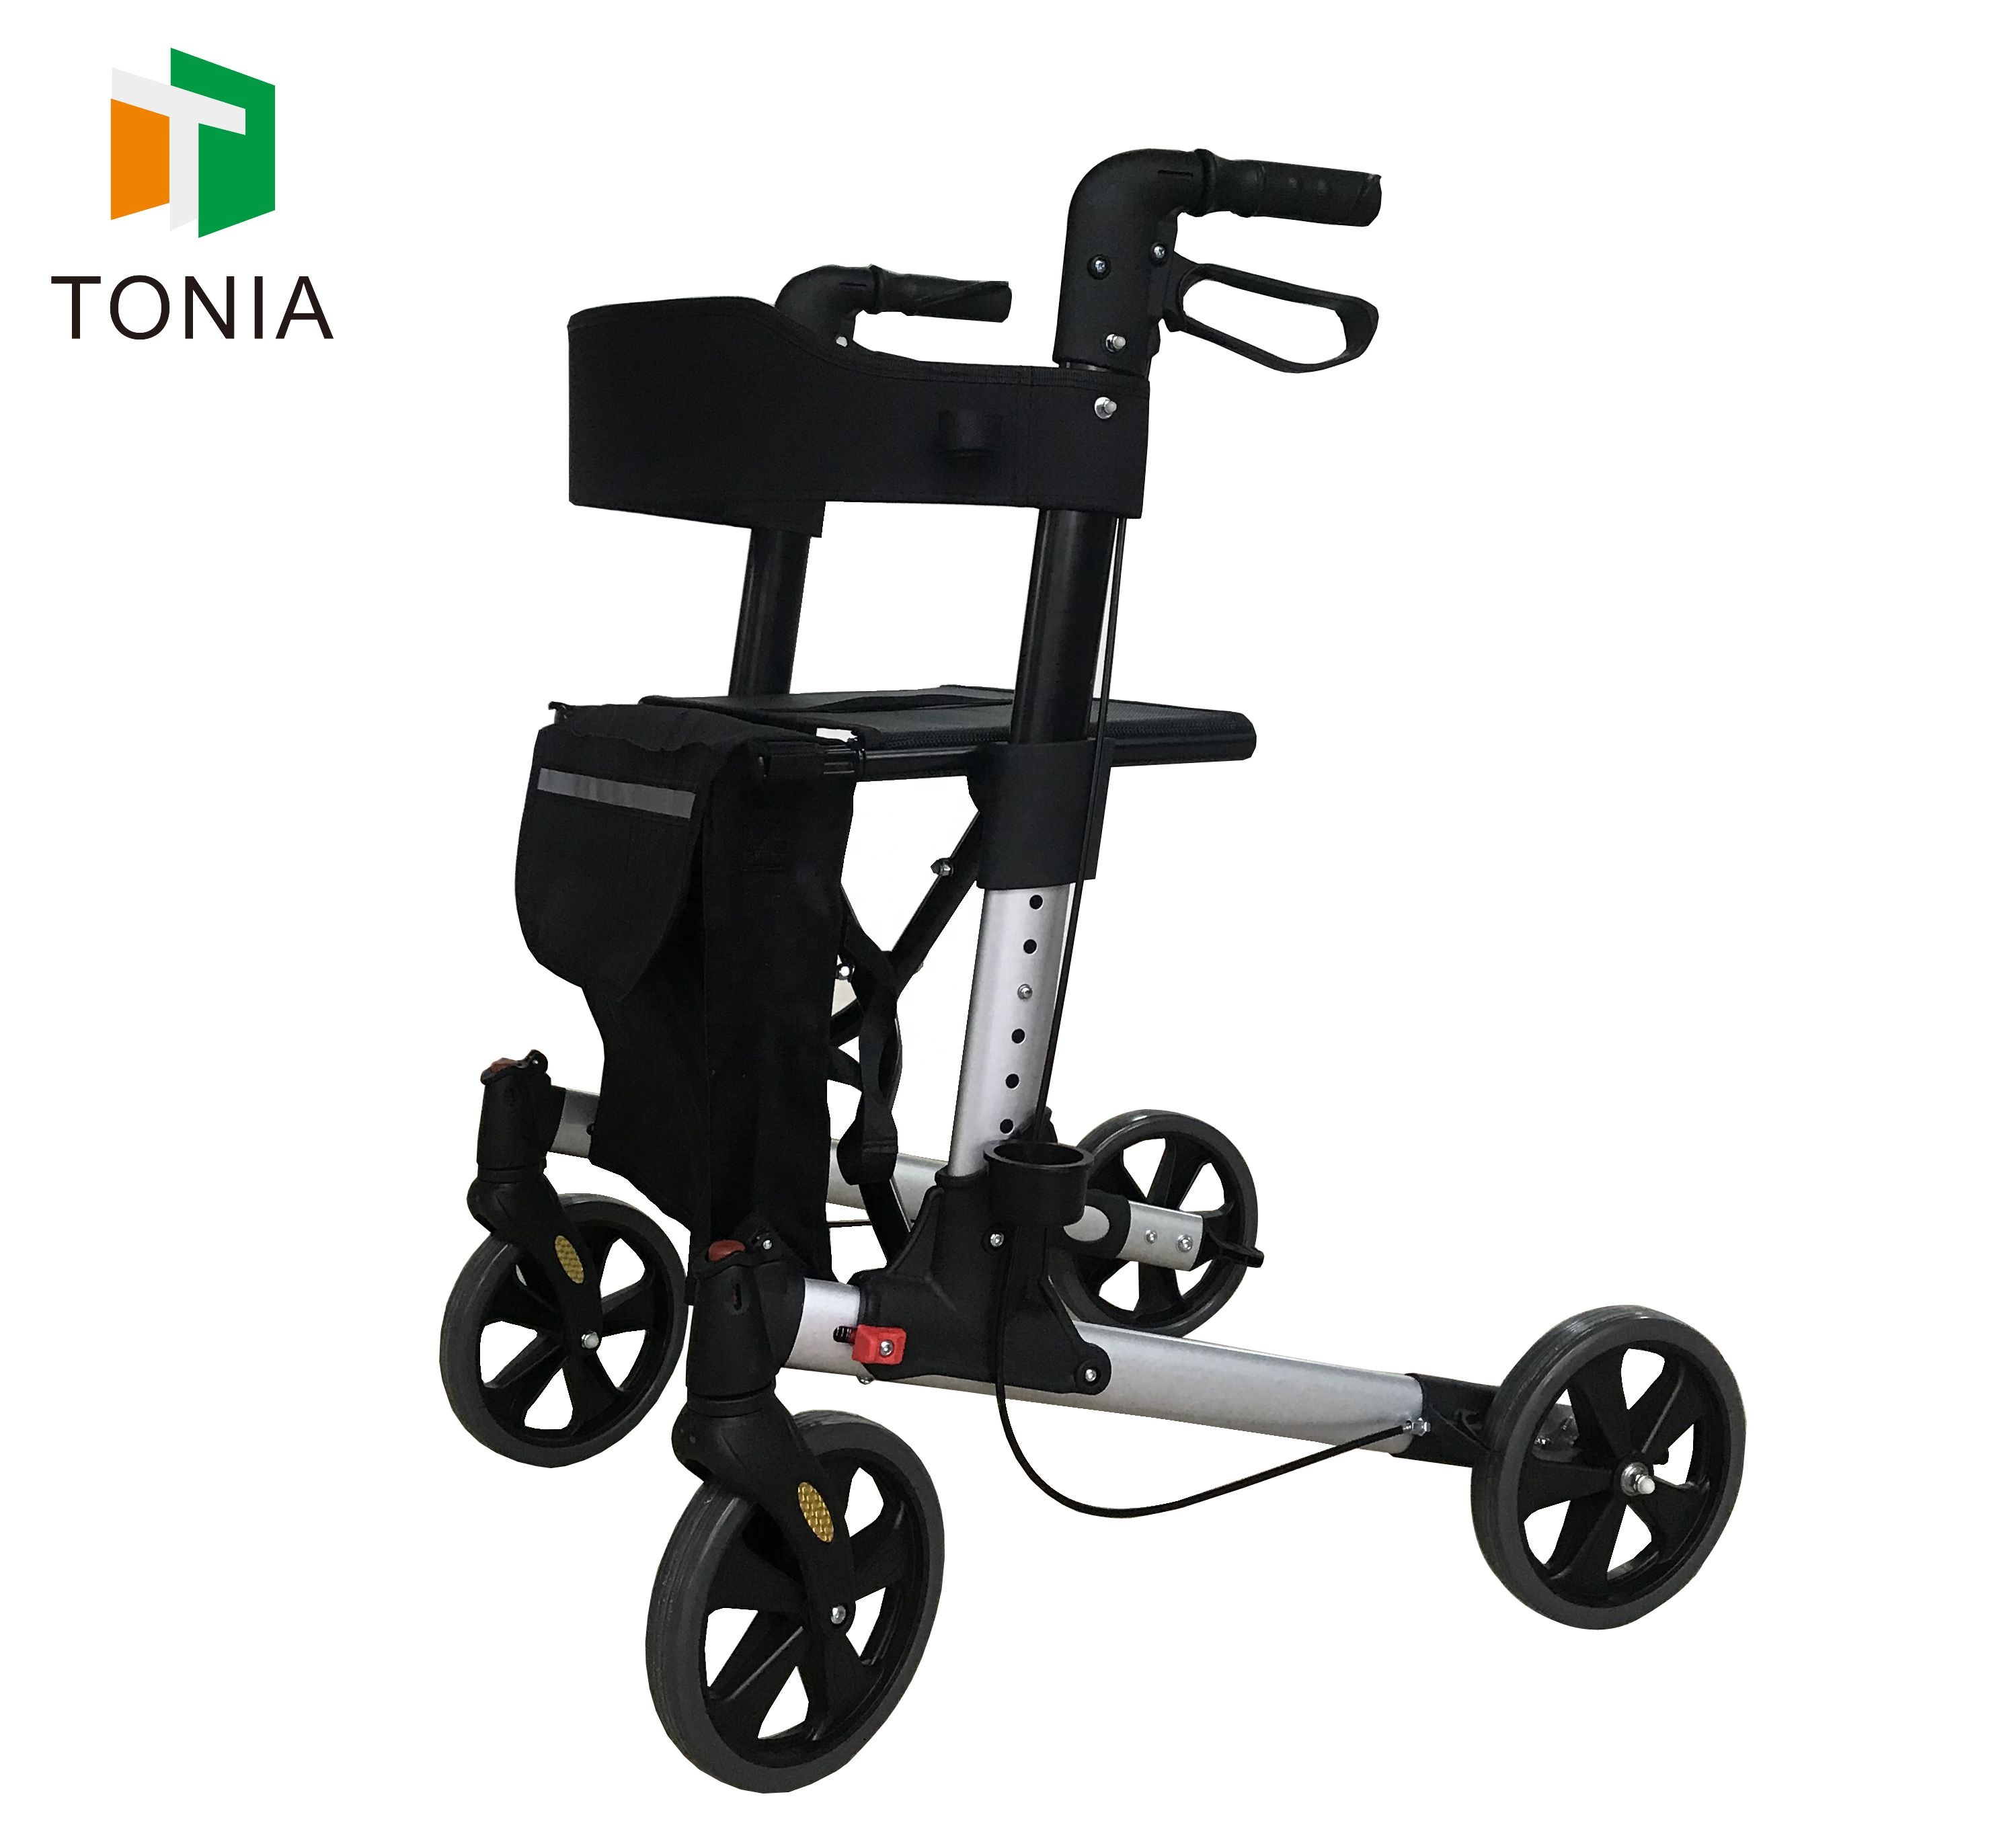 Double Foldable Aluminum Rollator for Easy Storage